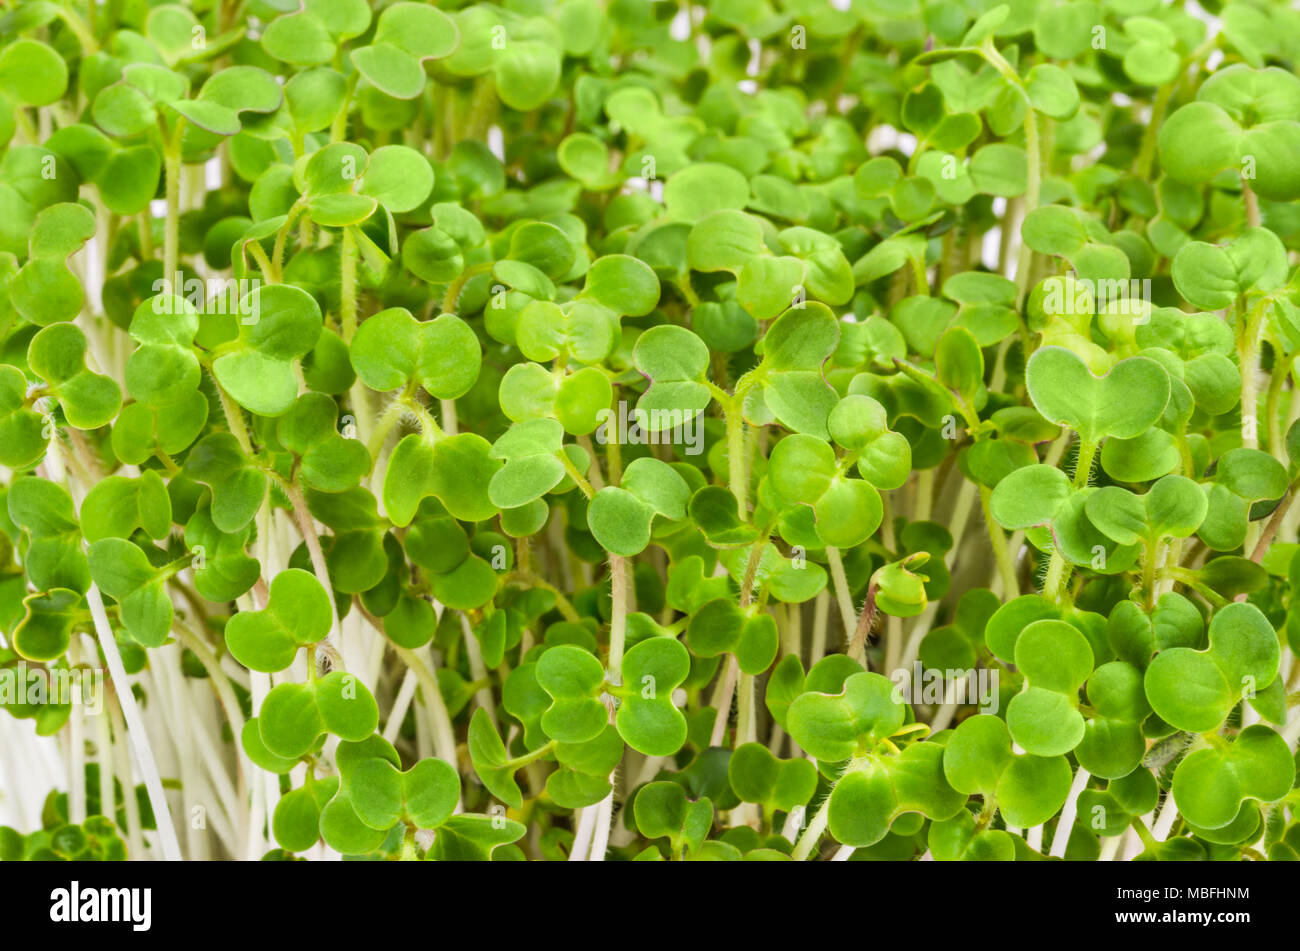 White mustard seedlings. Sprouts, vegetable, microgreen. Shoots and cotyledons of Sinapis alba, also yellow mustard, an edible herb. Macro food photo. Stock Photo